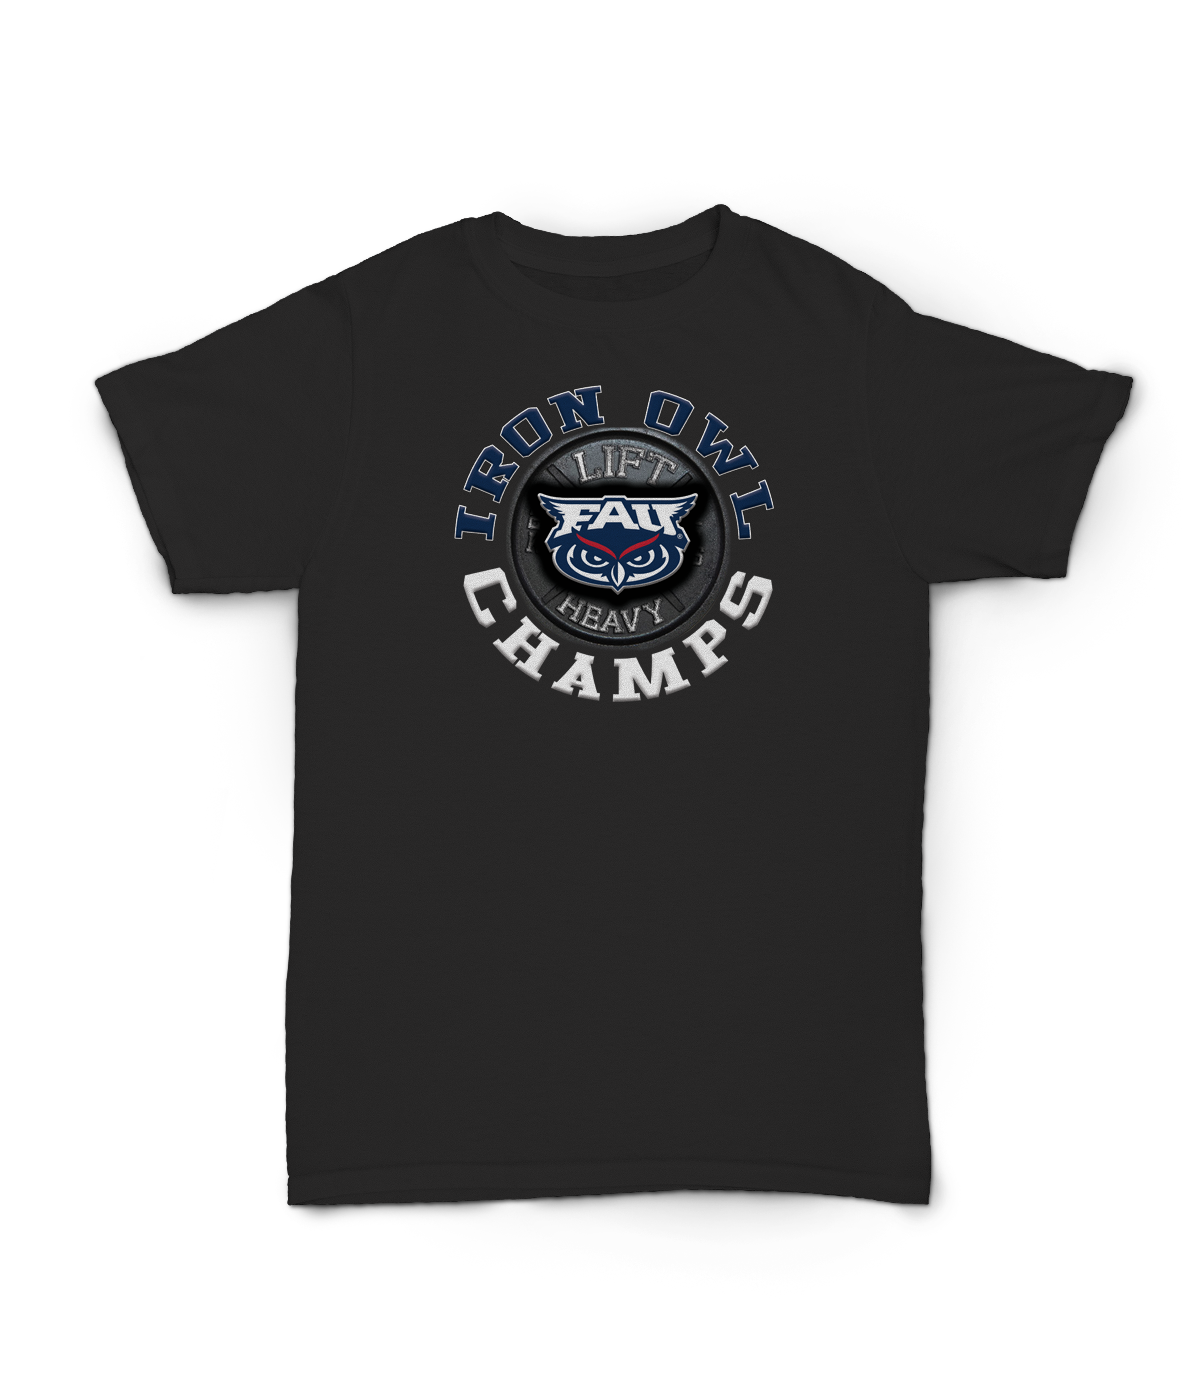 champs tees